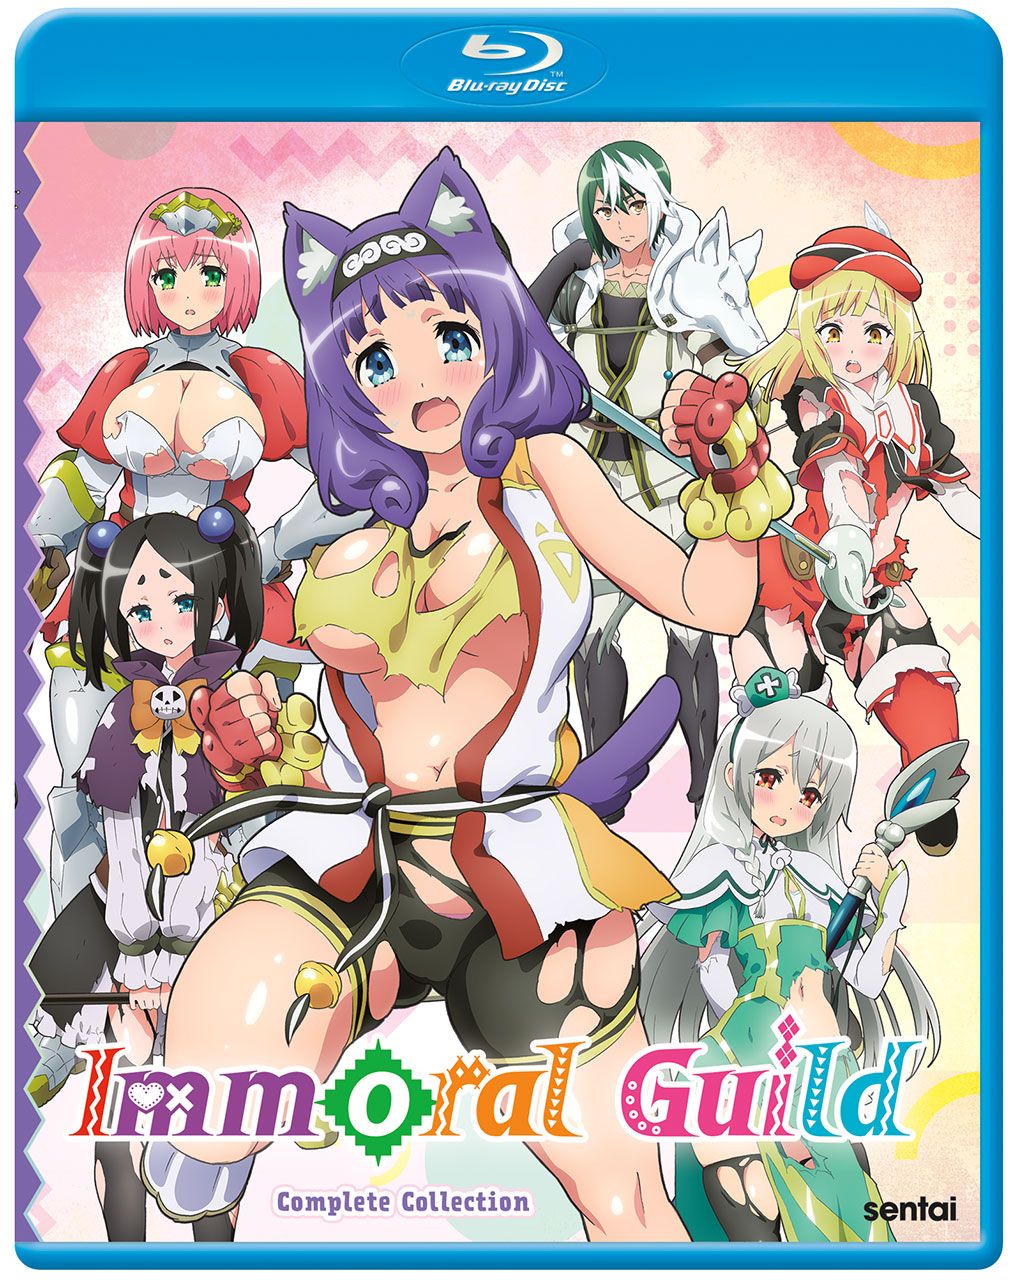 Immoral Guild. Blu-ray cover art provided by Sentai.